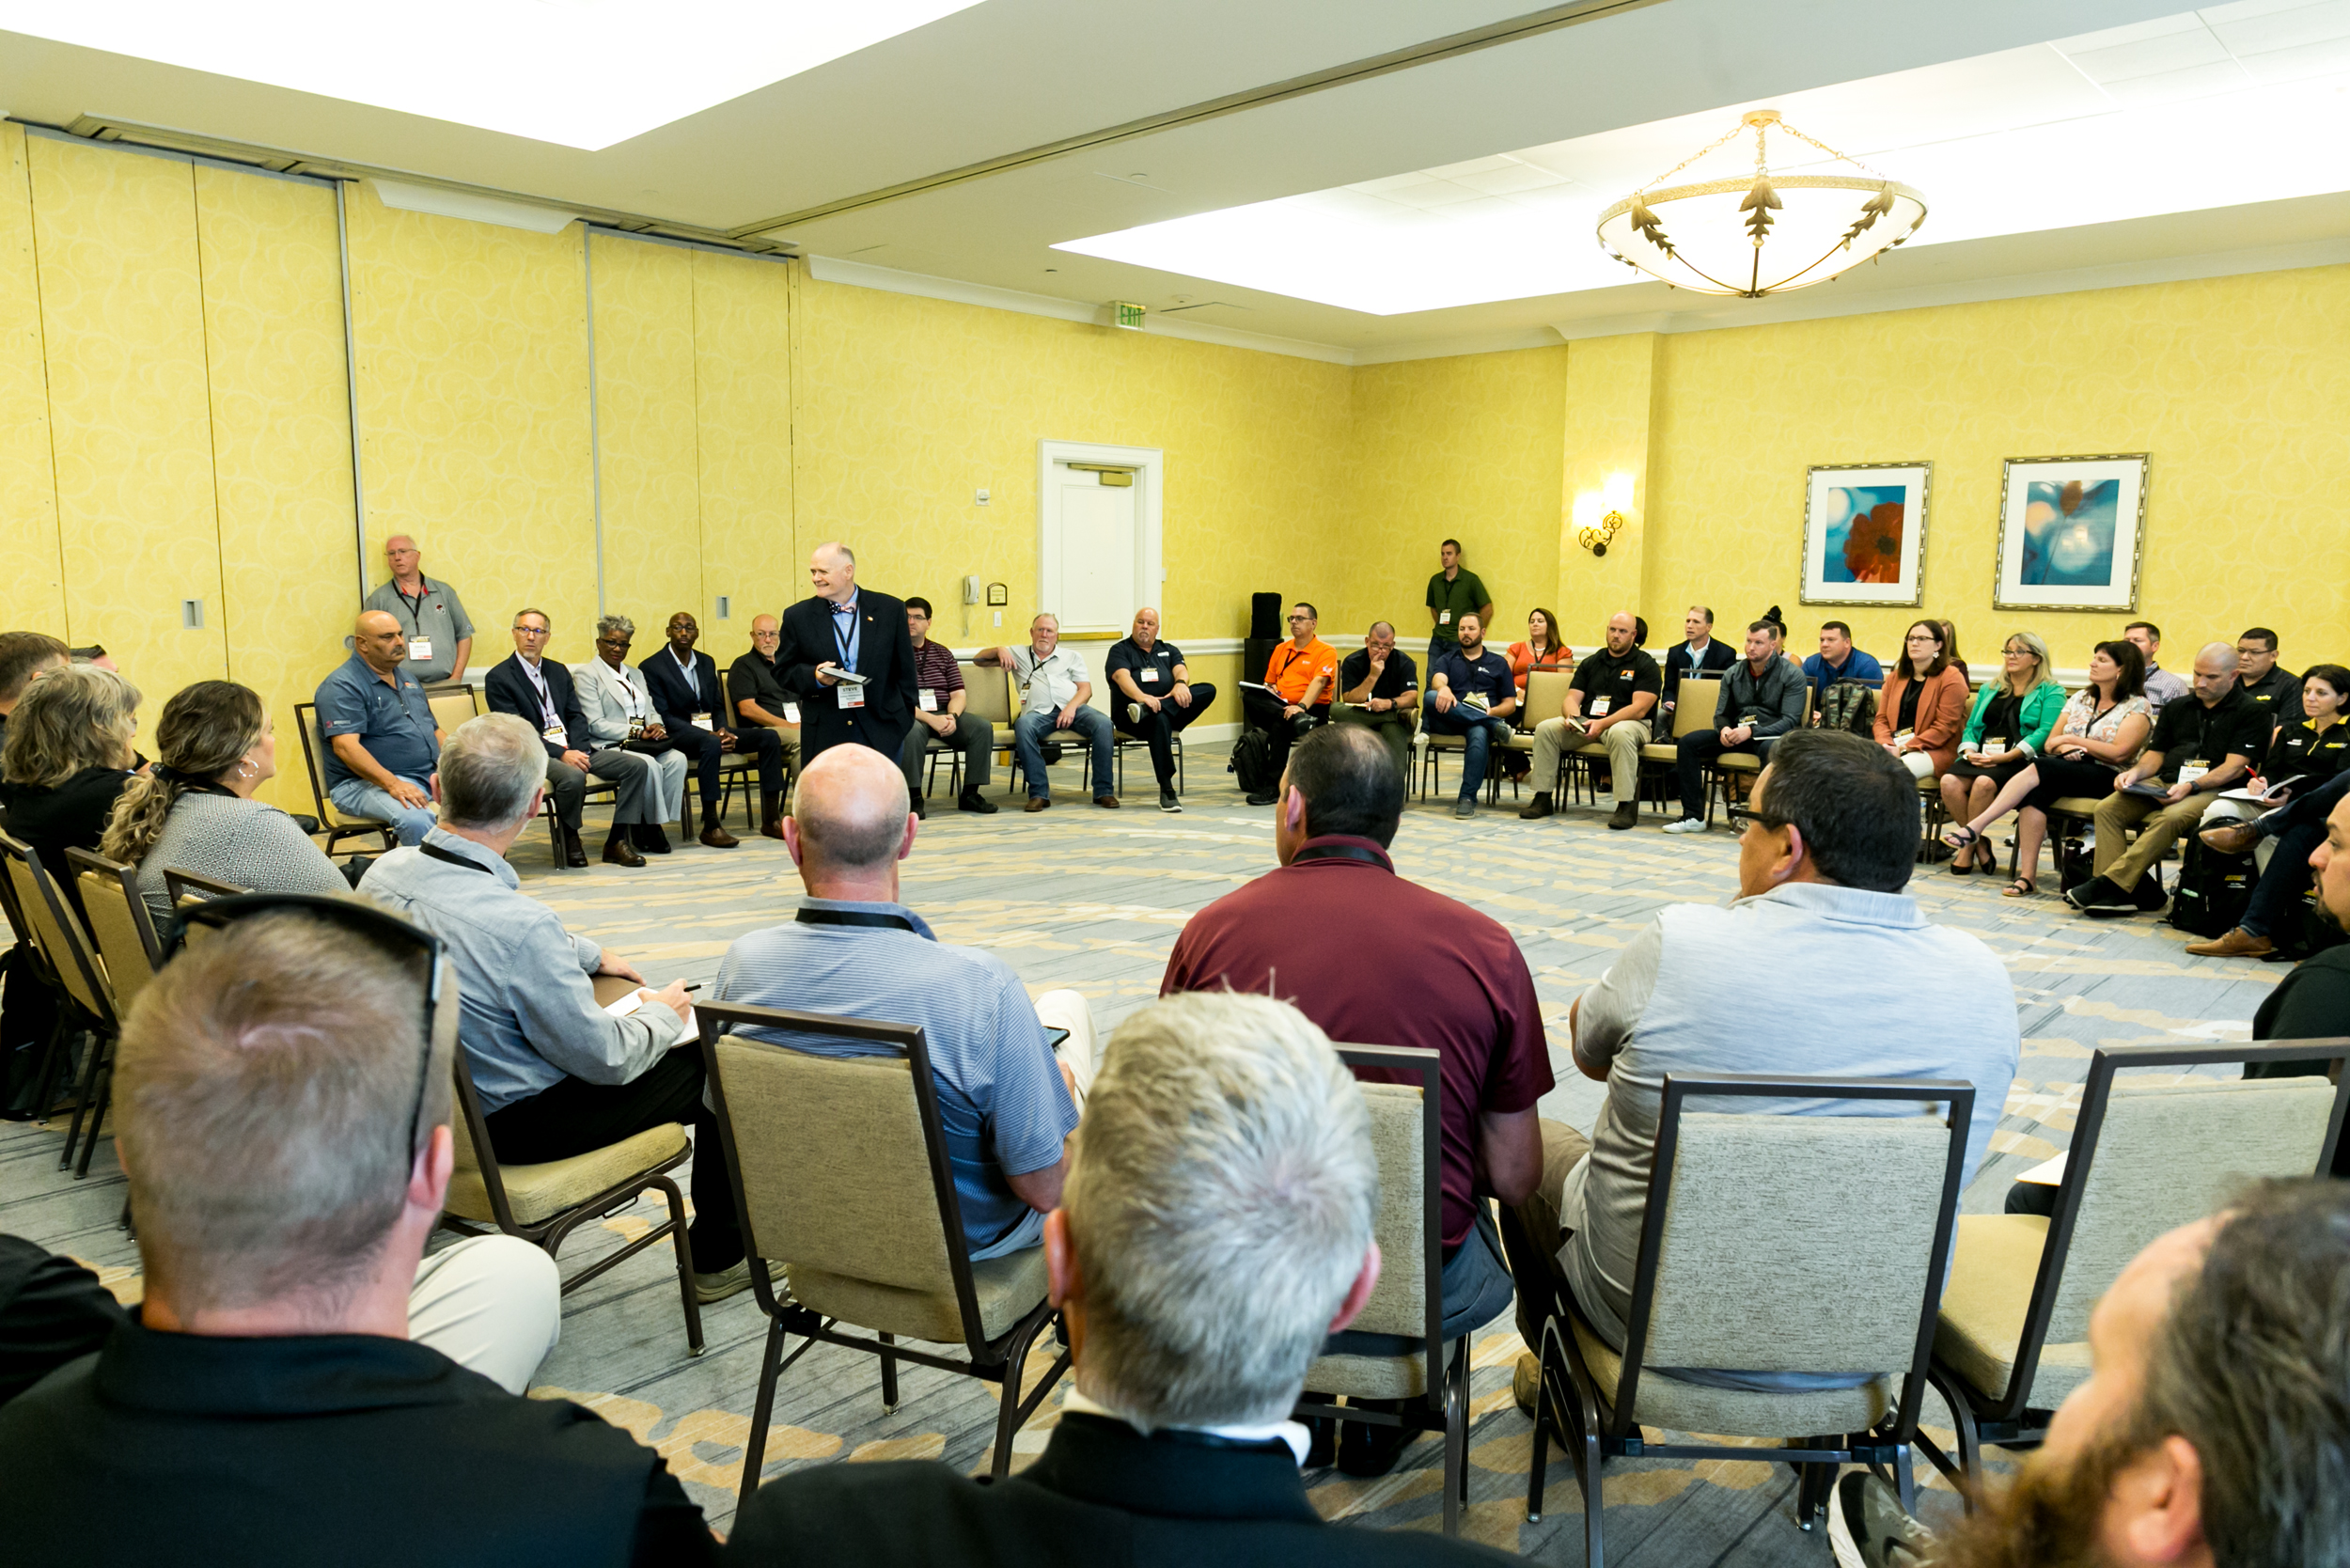 NPTC's National Safety Conference Safety-in-the-round discussion